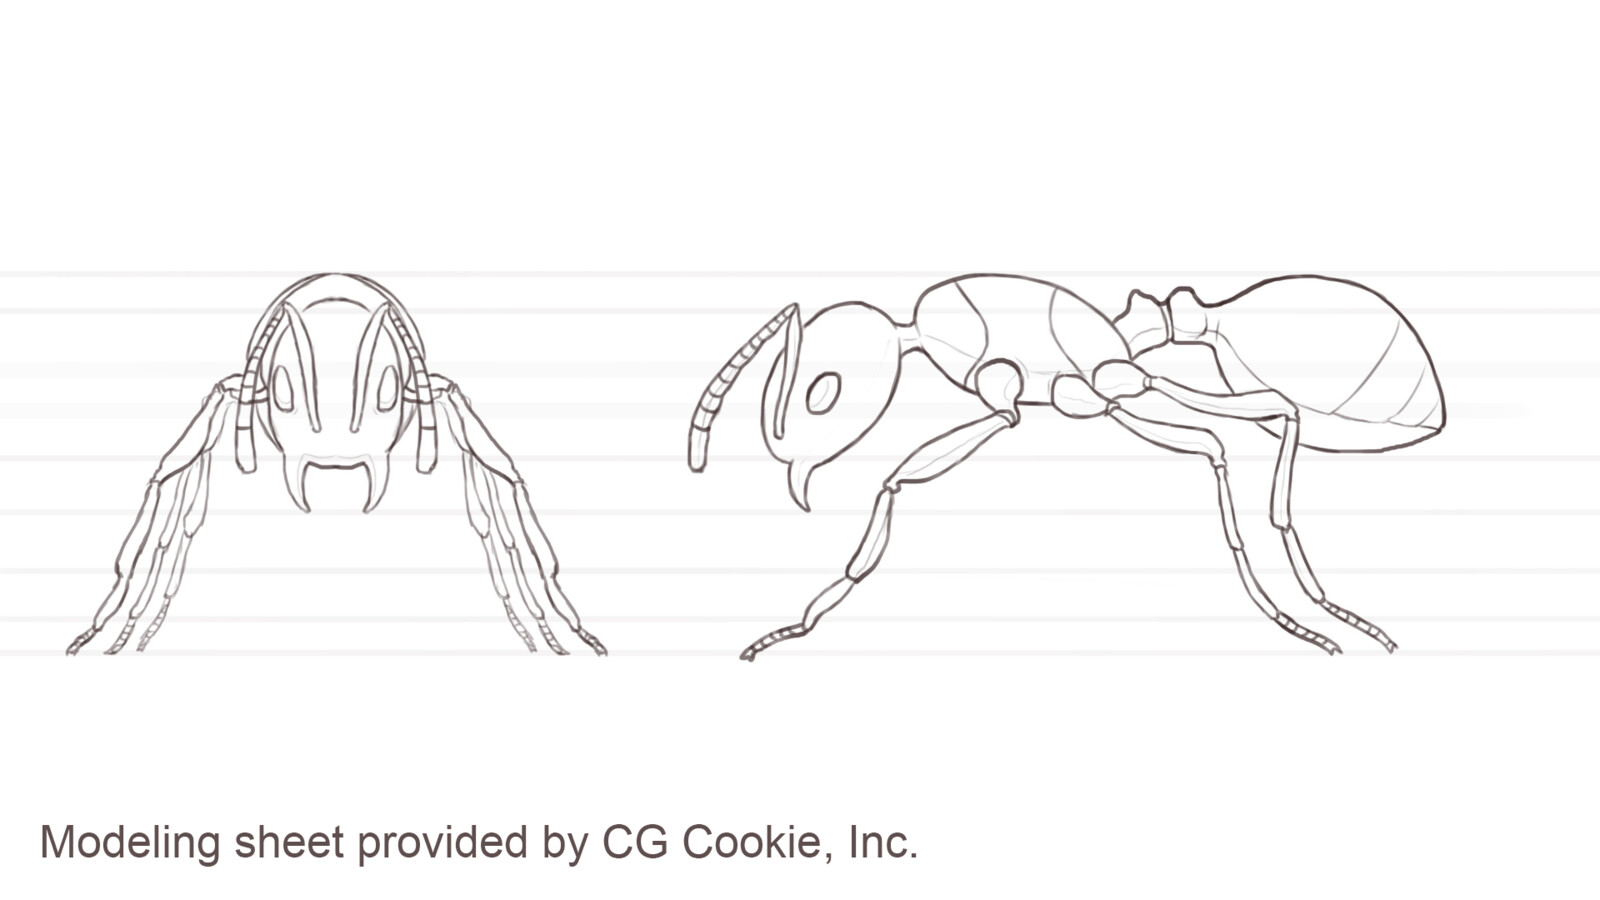 Modeling sheet provided by CG Cookie, Inc.